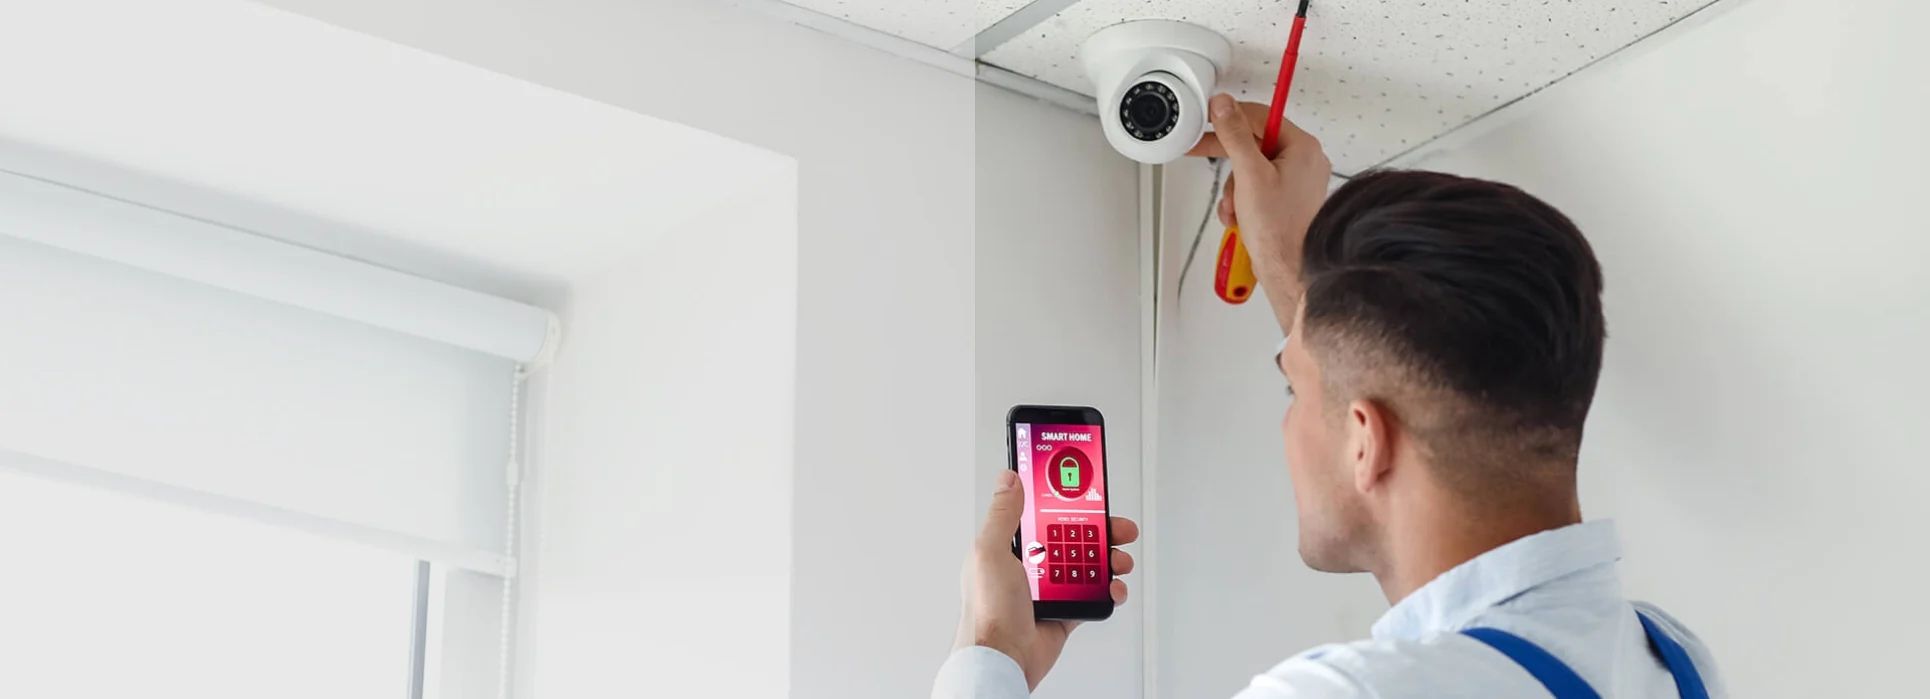 How To Start A Smart Home Installation Business